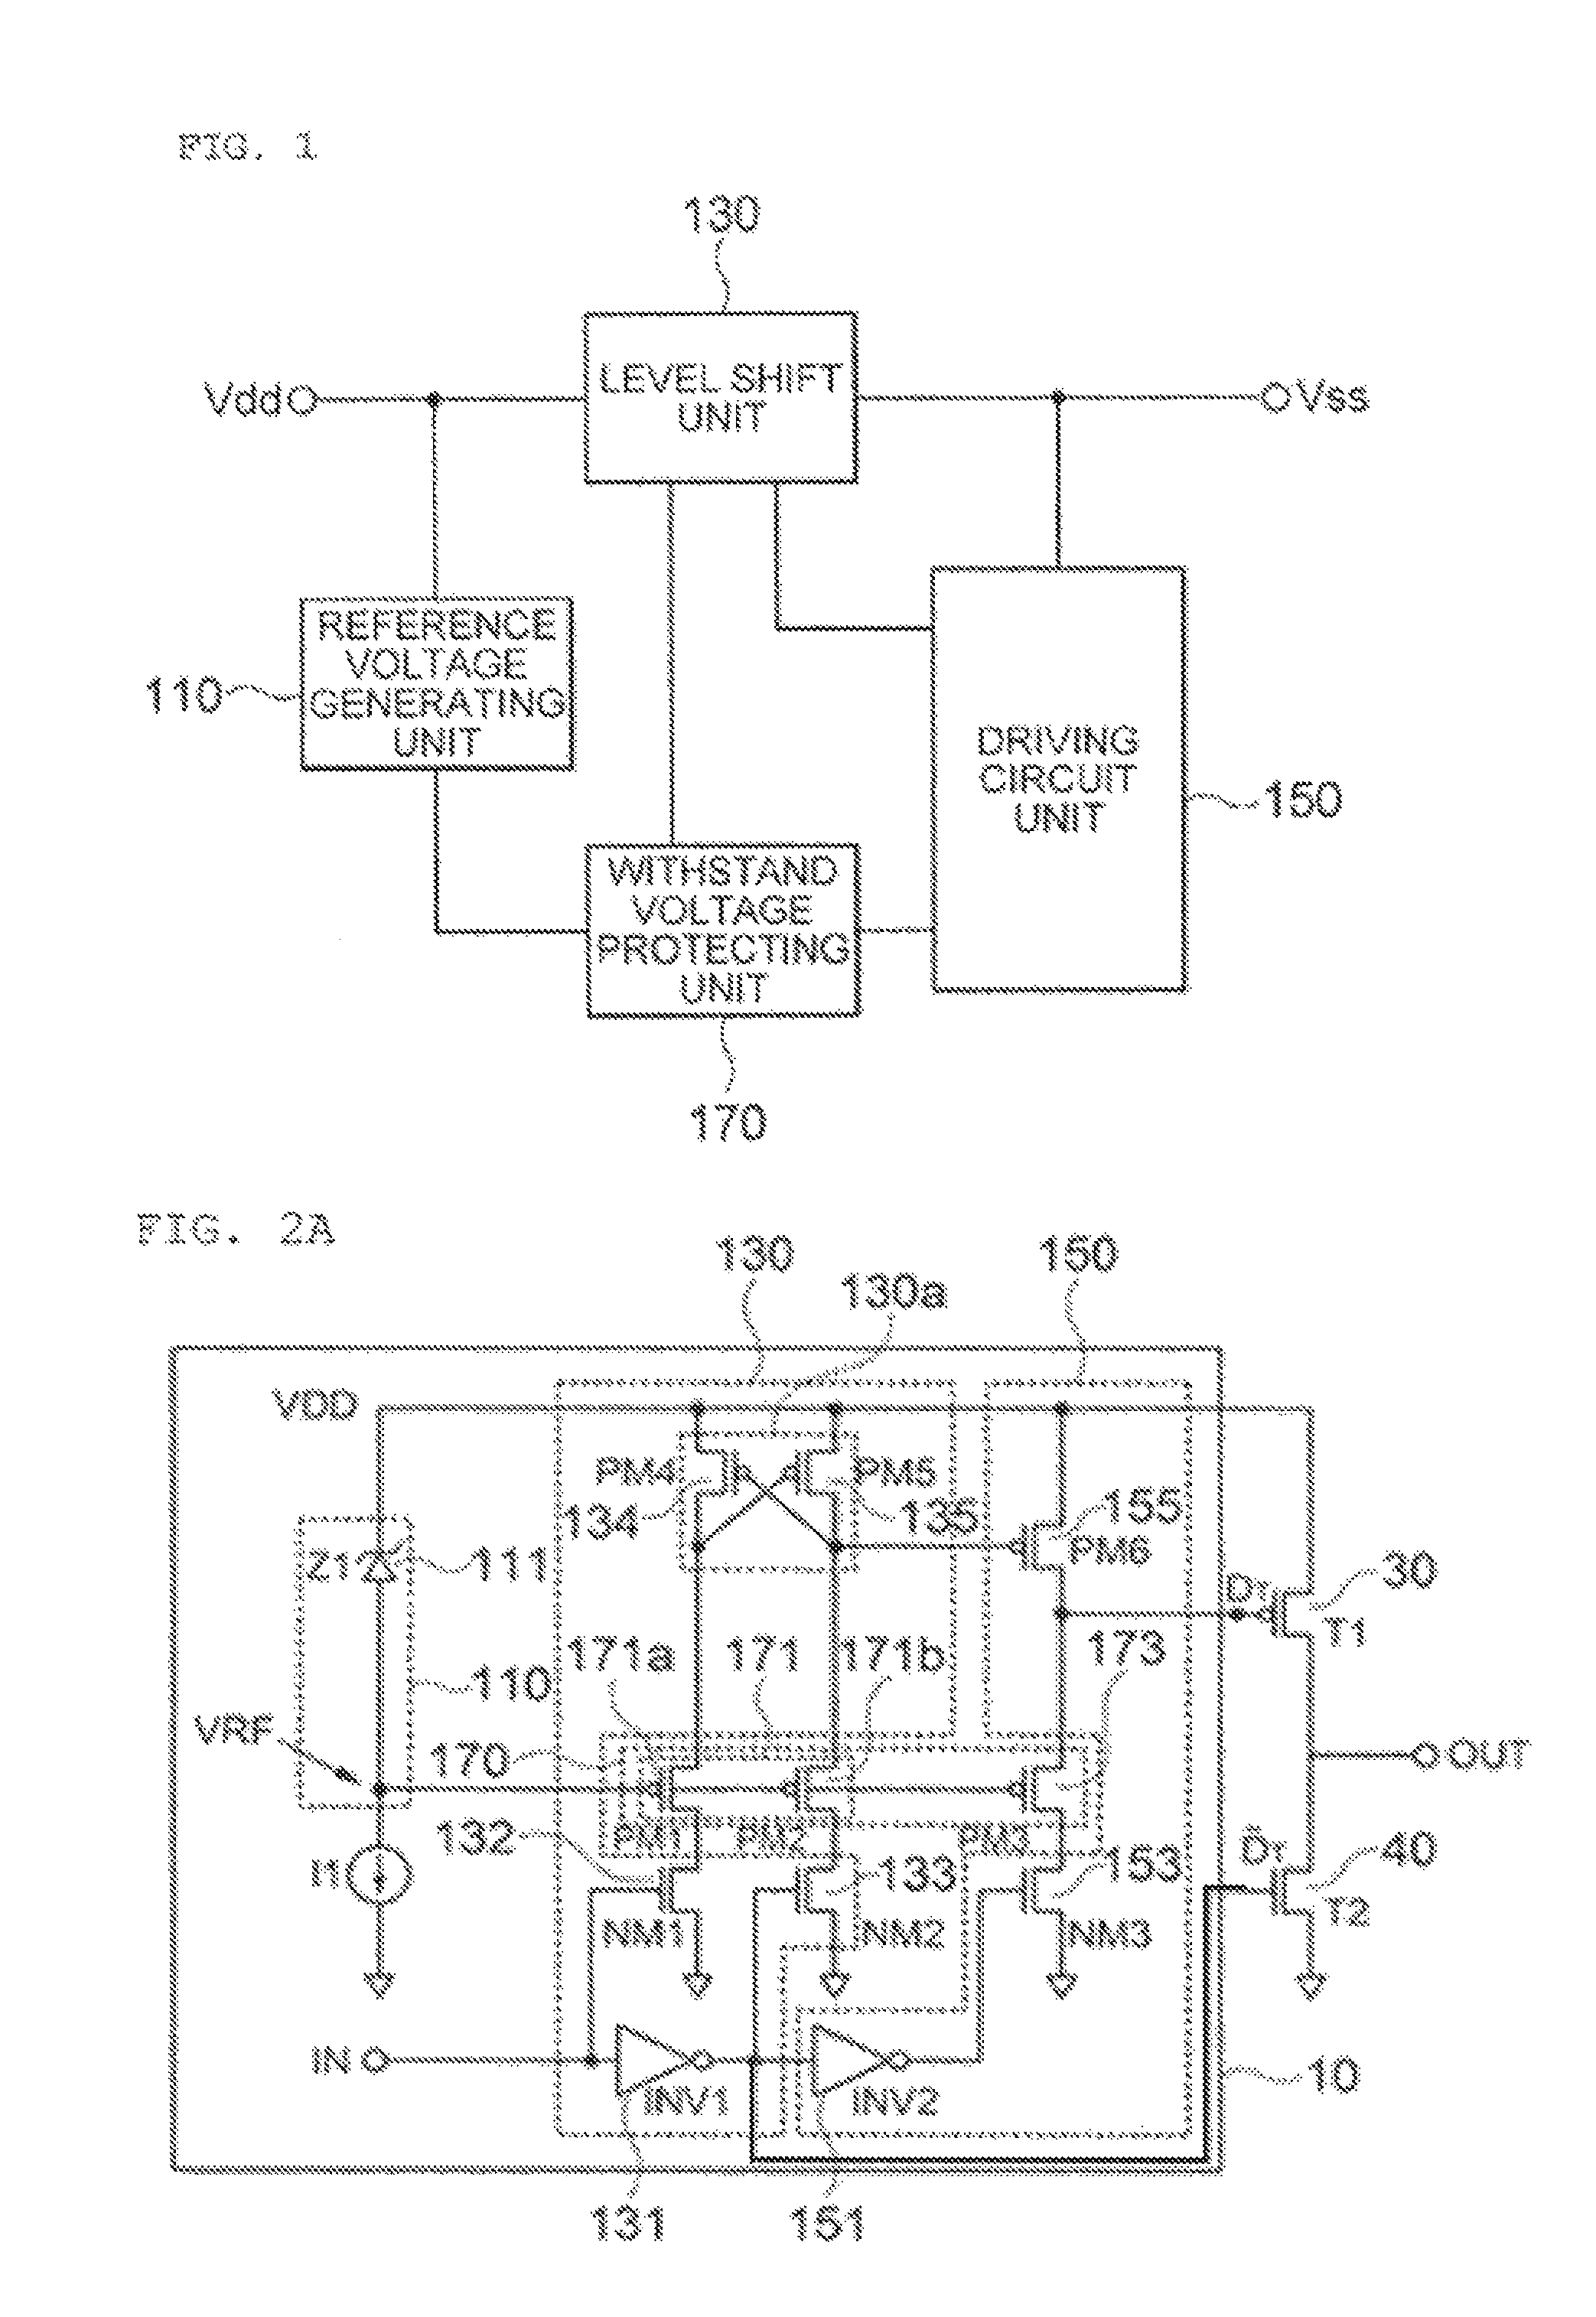 Output driving circuit and transistor output circuit